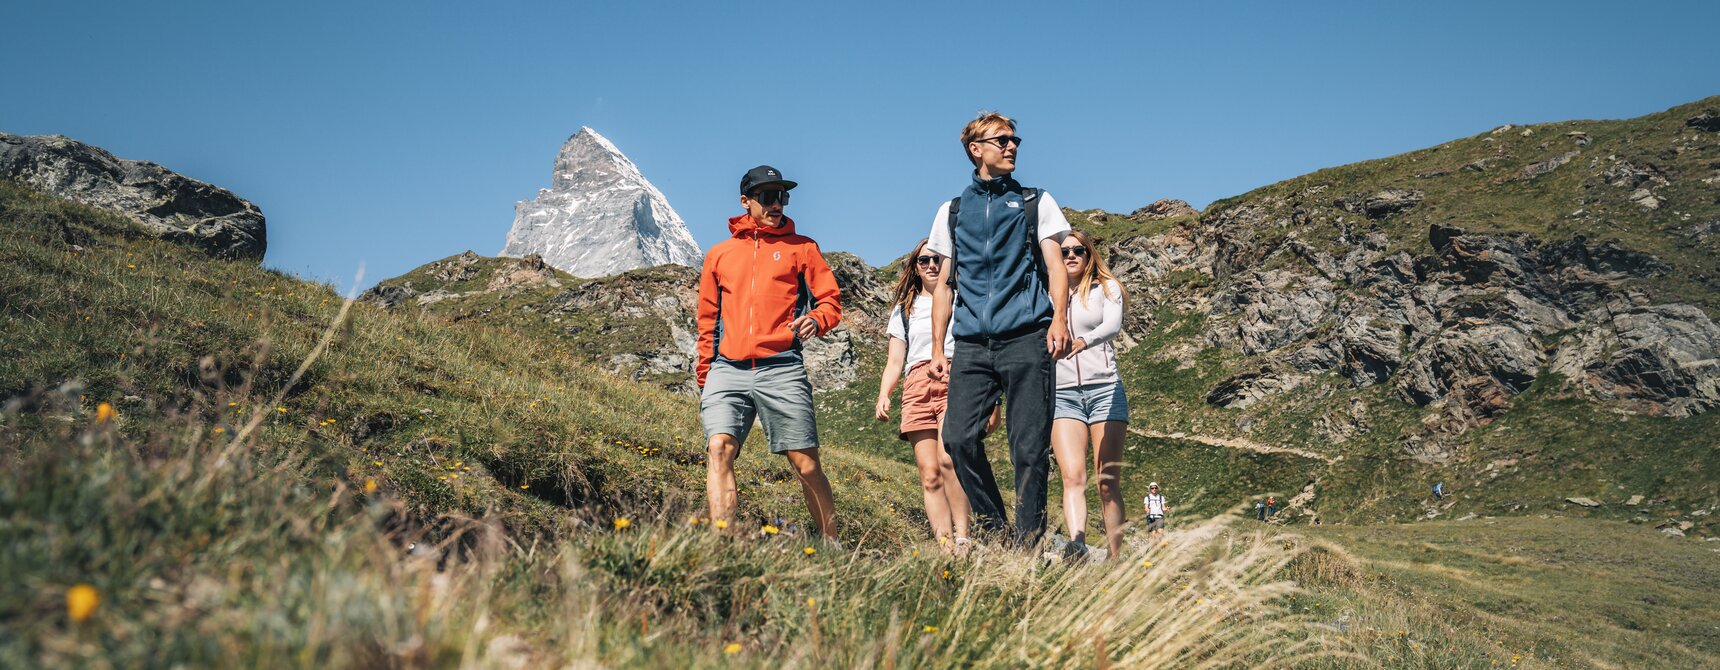 Hiking with friends on the Schwarzsee with the Matterhorn in the background | © Gabriel Perren